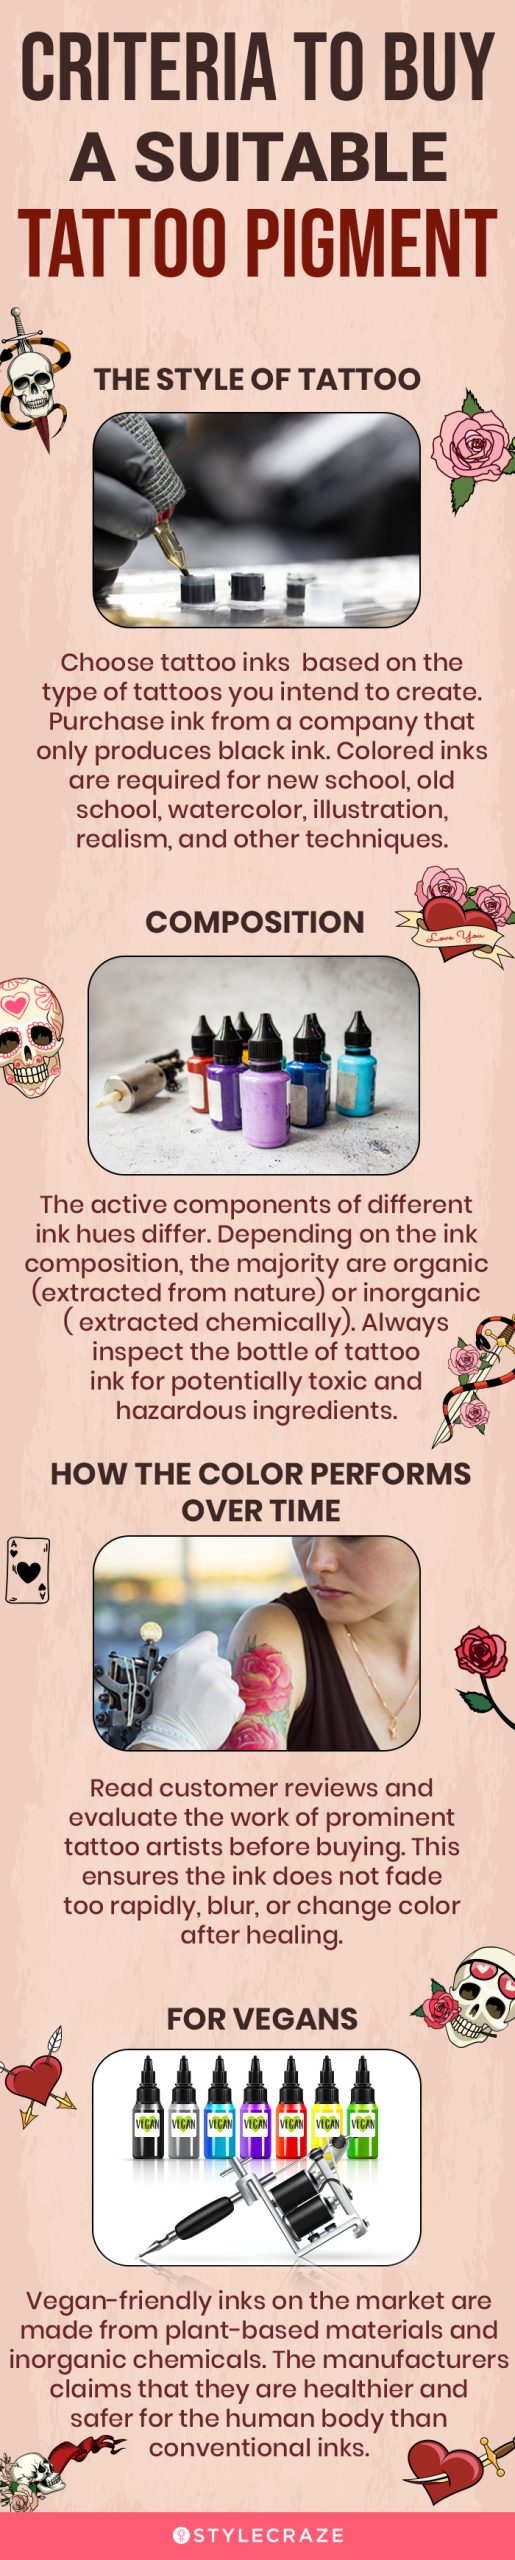 Criteria To Buy A Suitable Tattoo Pigment [infographic]